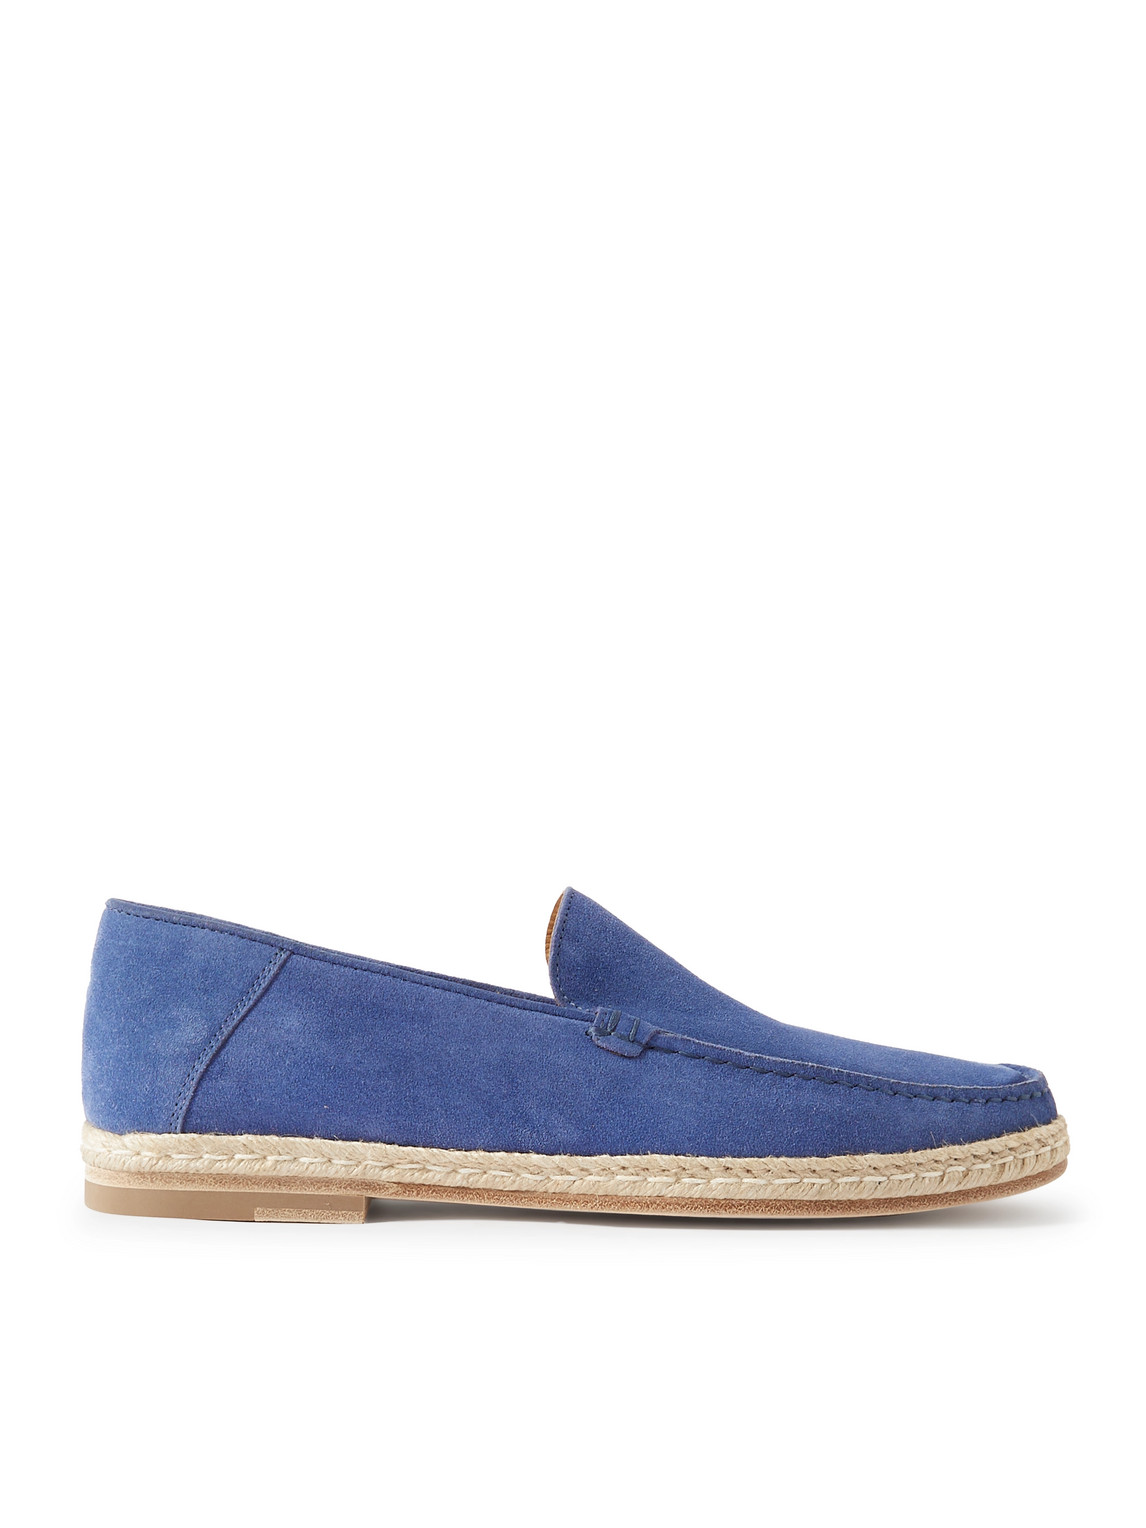 J.M. Weston Suede Loafers